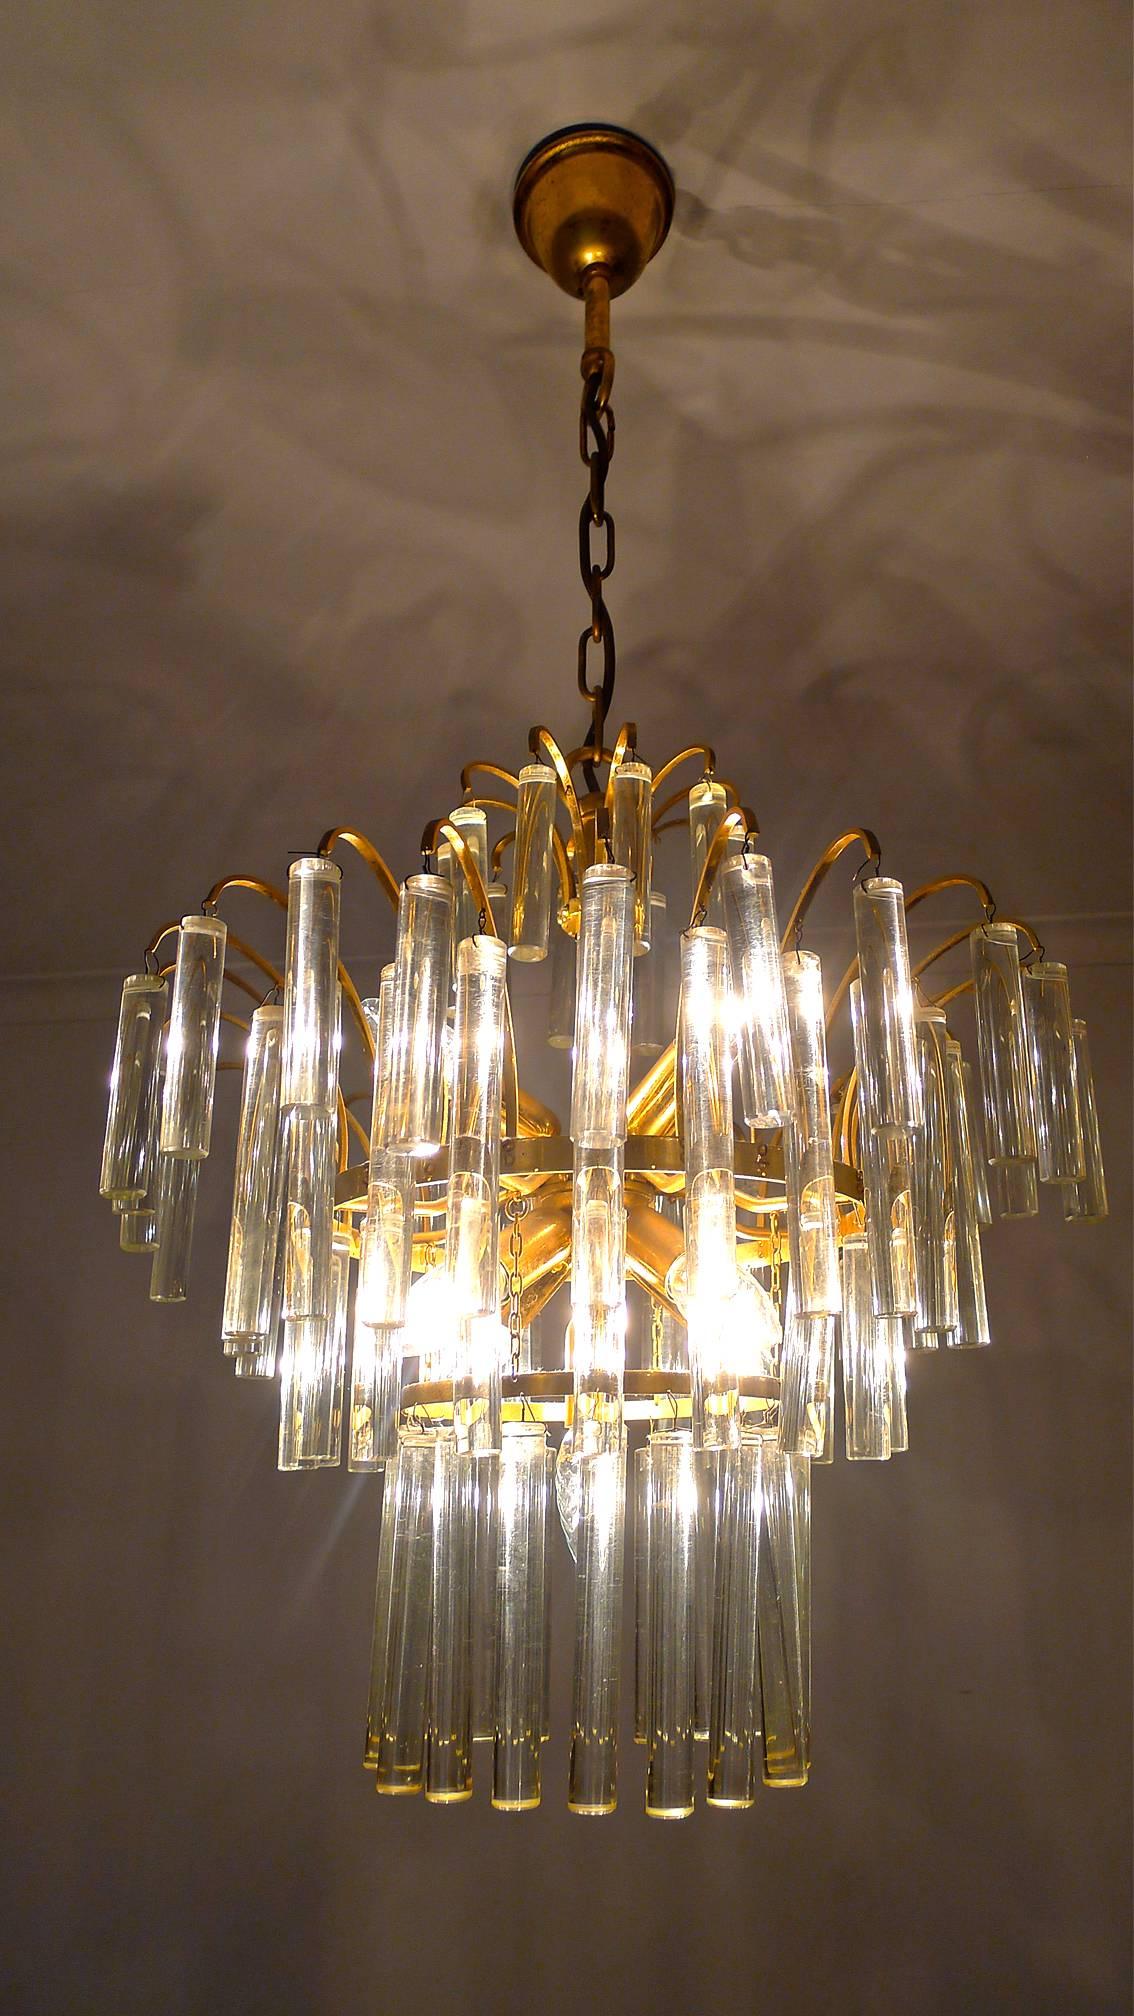 Large Venini Camer Midcentury Gilt Brass 94 Crystal Rods Waterfall Chandelier For Sale 4